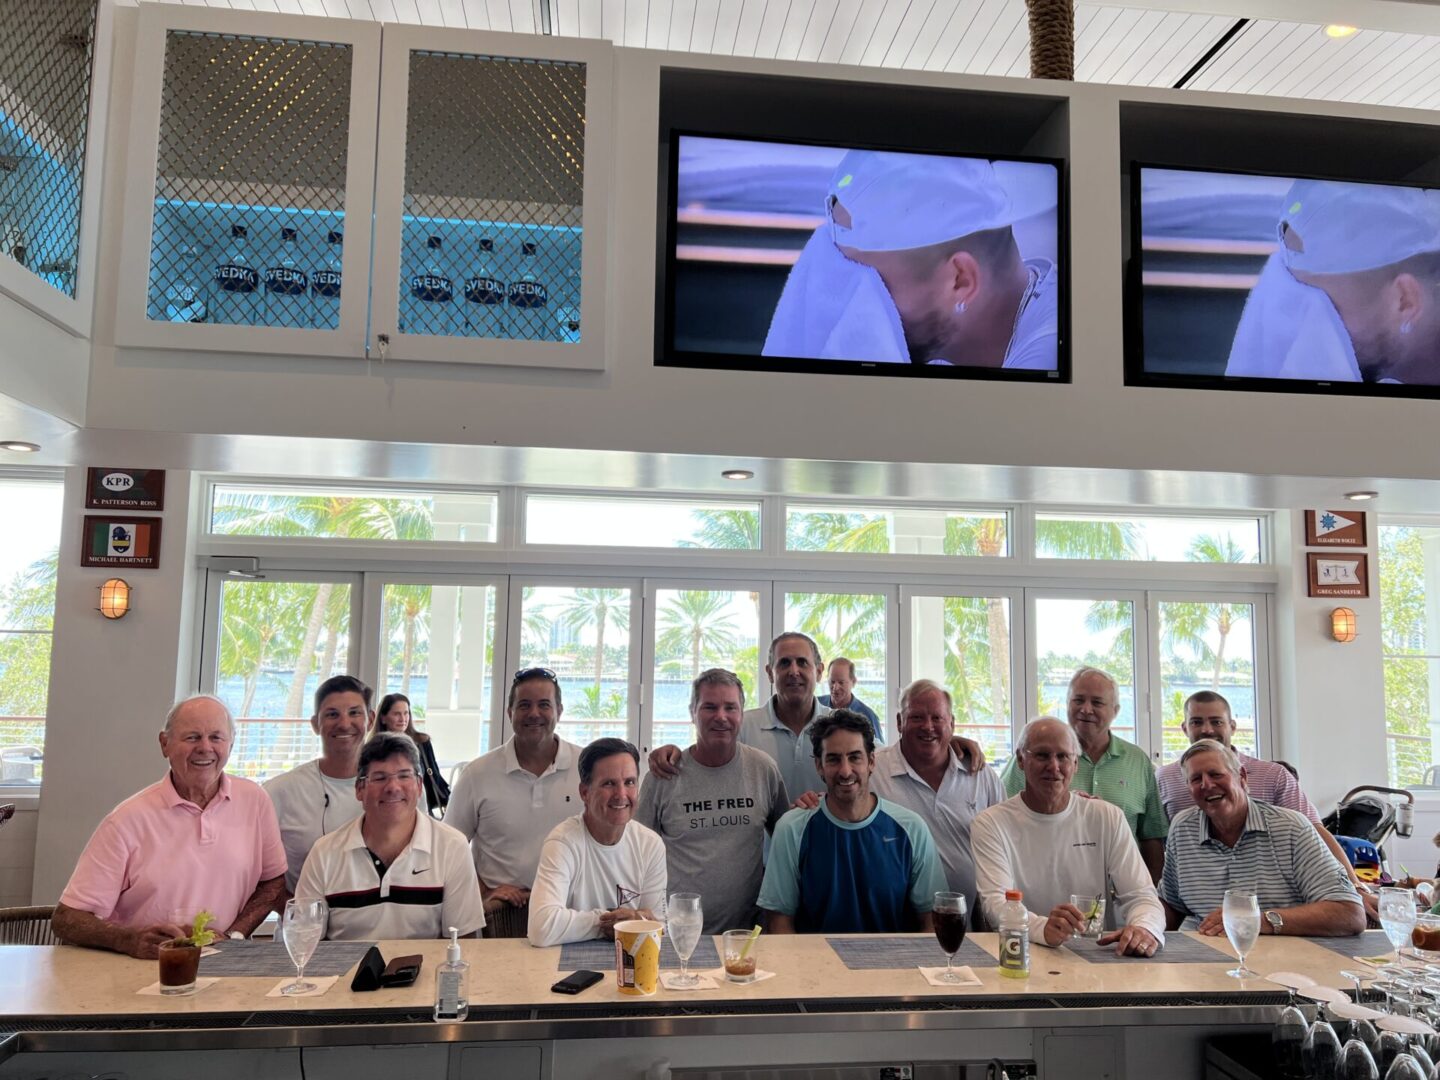 Group of yacht enthusiasts at a restaurant